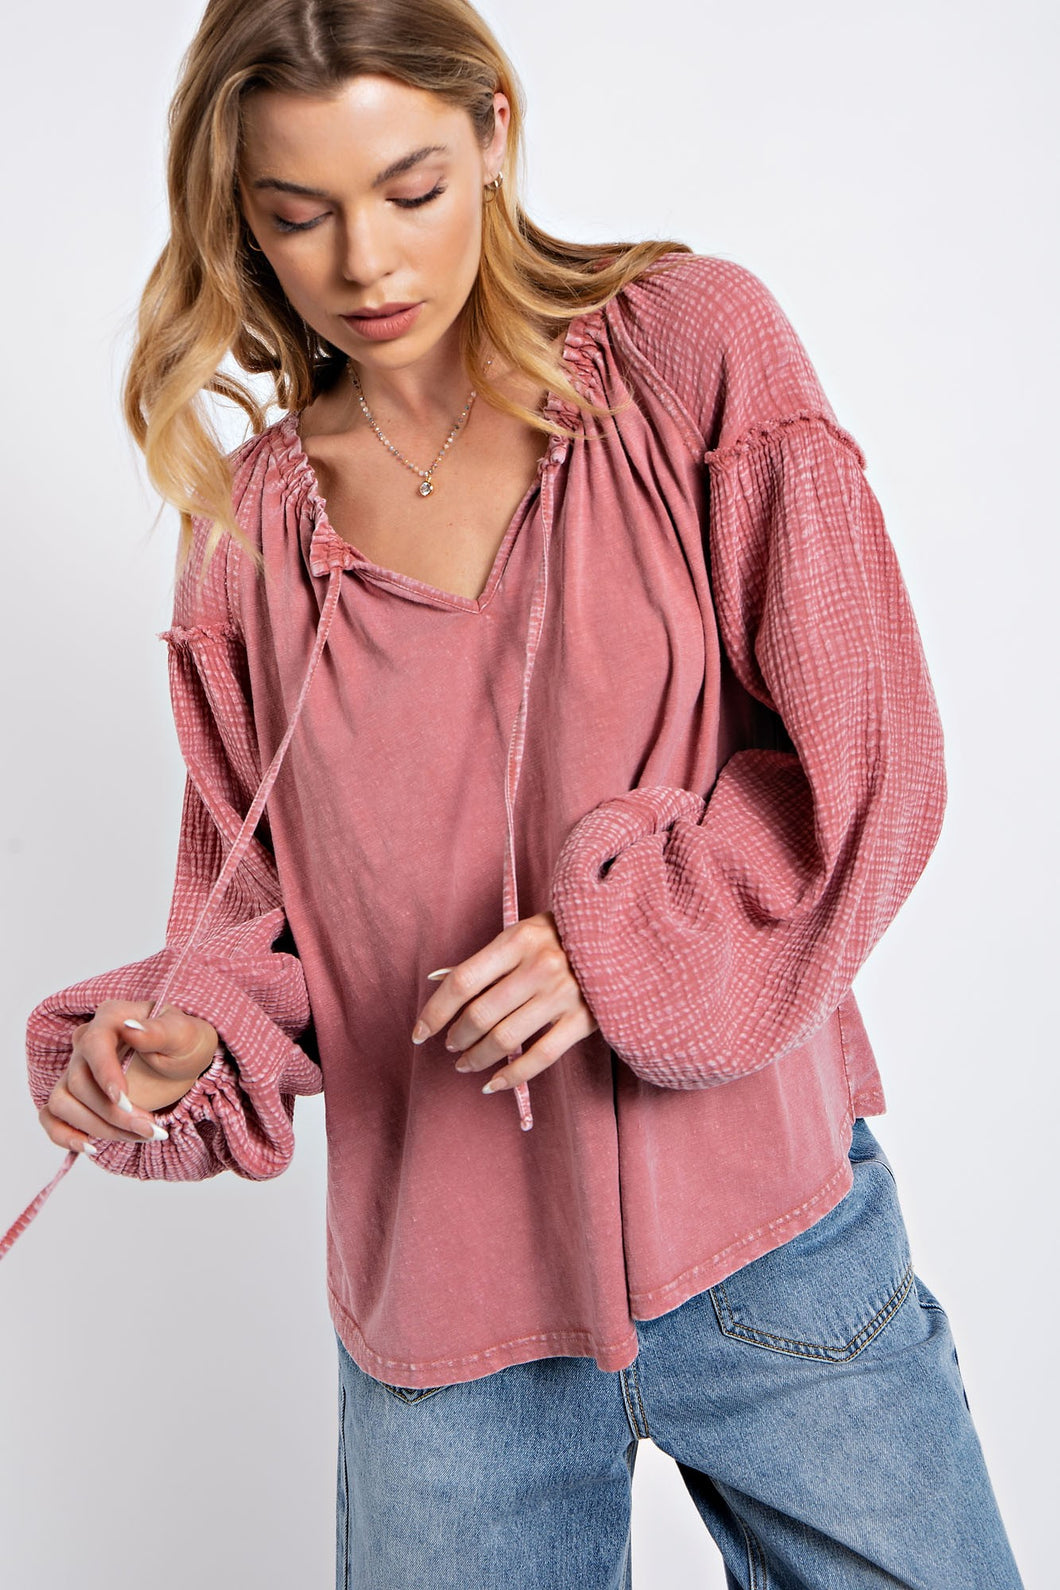 Easel Cotton Mineral Washed Top in Dried Rose Shirts & Tops Easel   